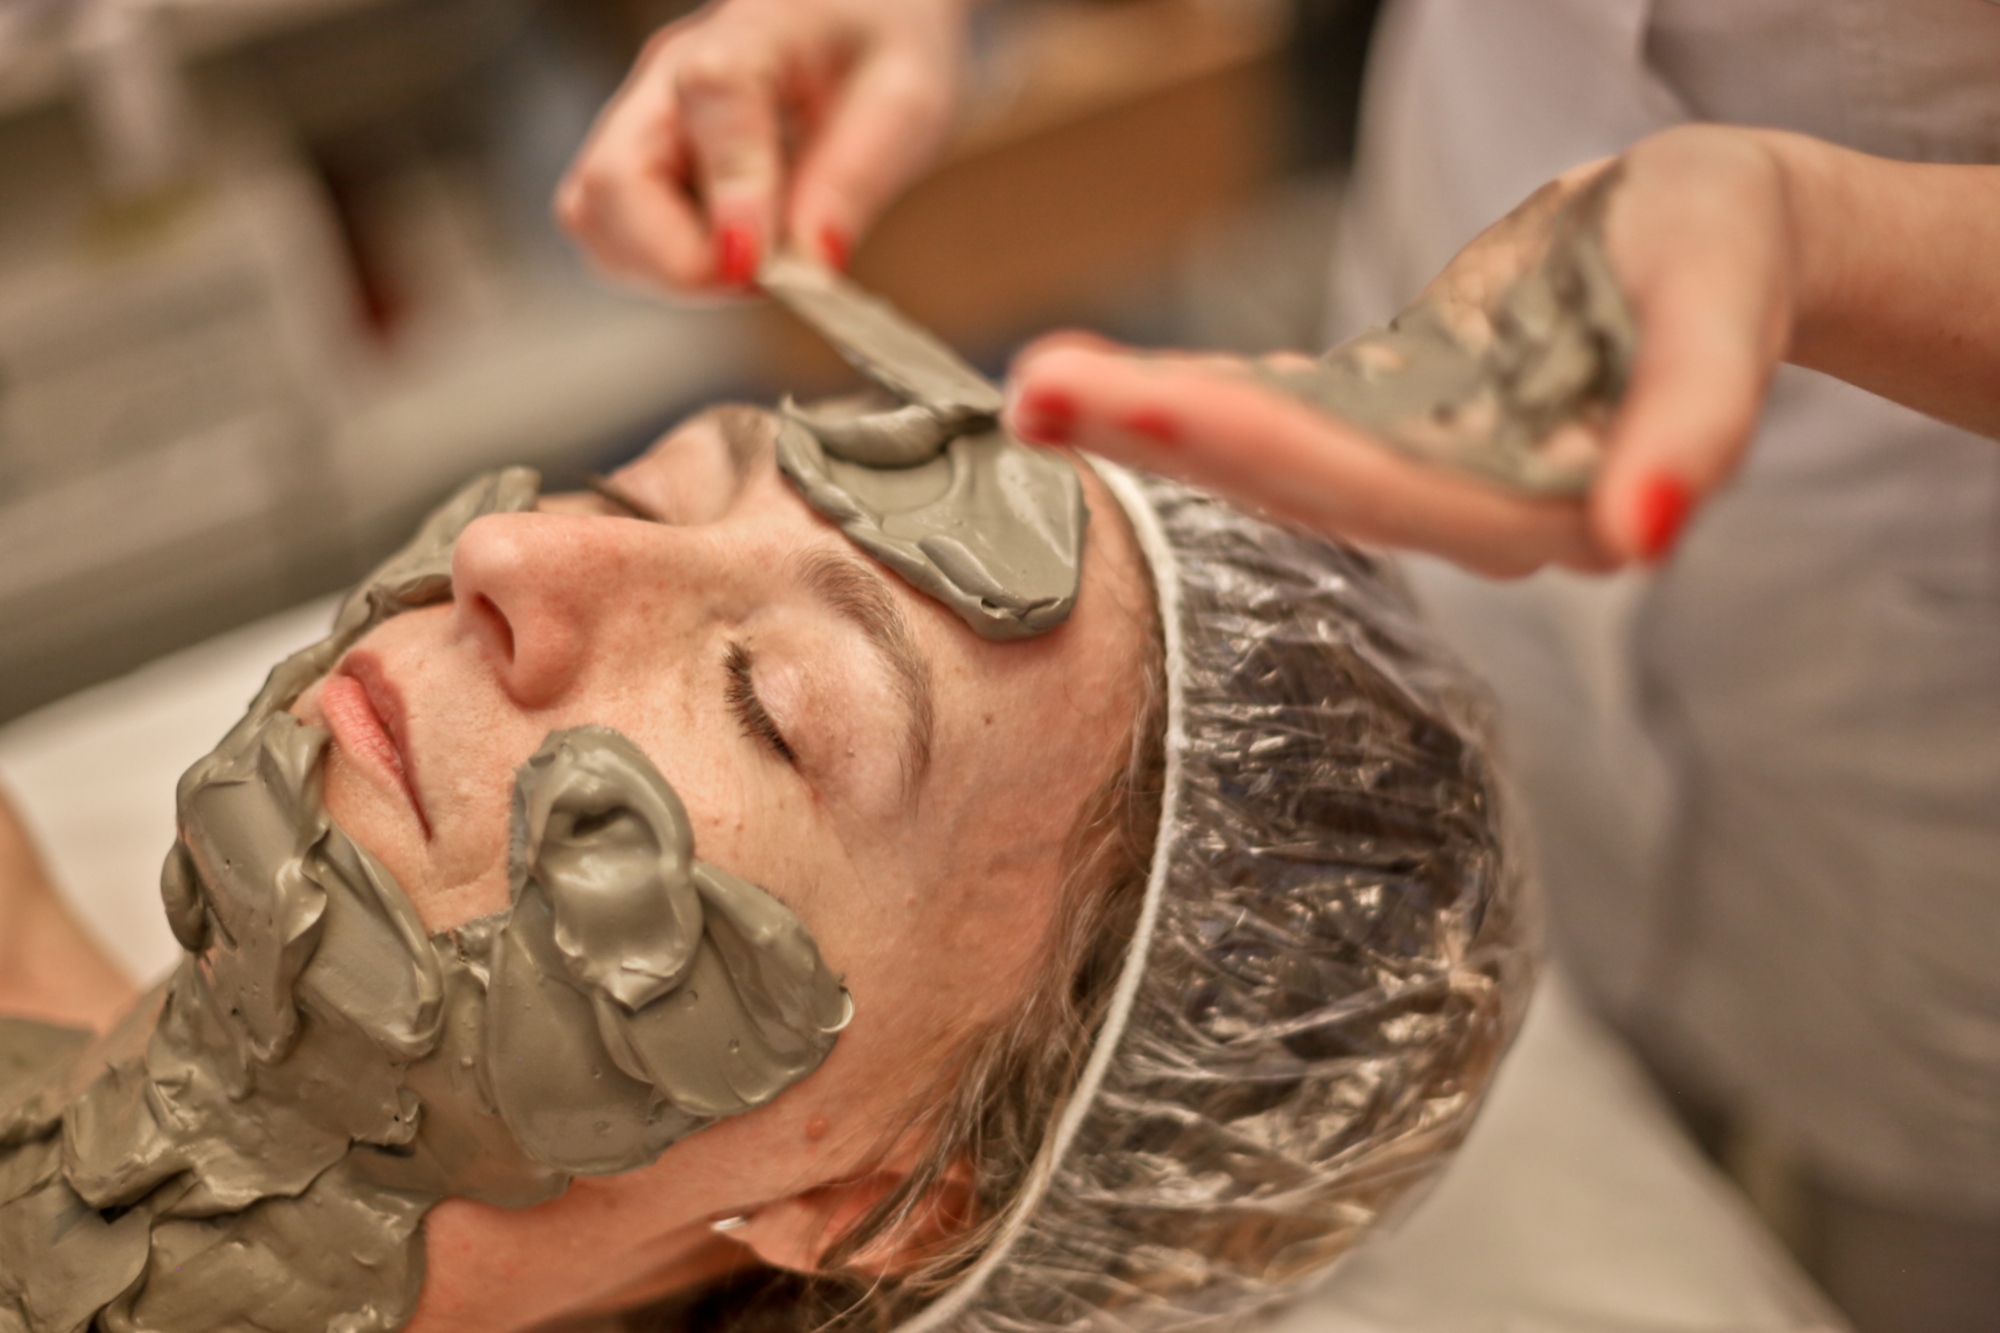 Beauty treatment at Terme Excelsior, Montecatini